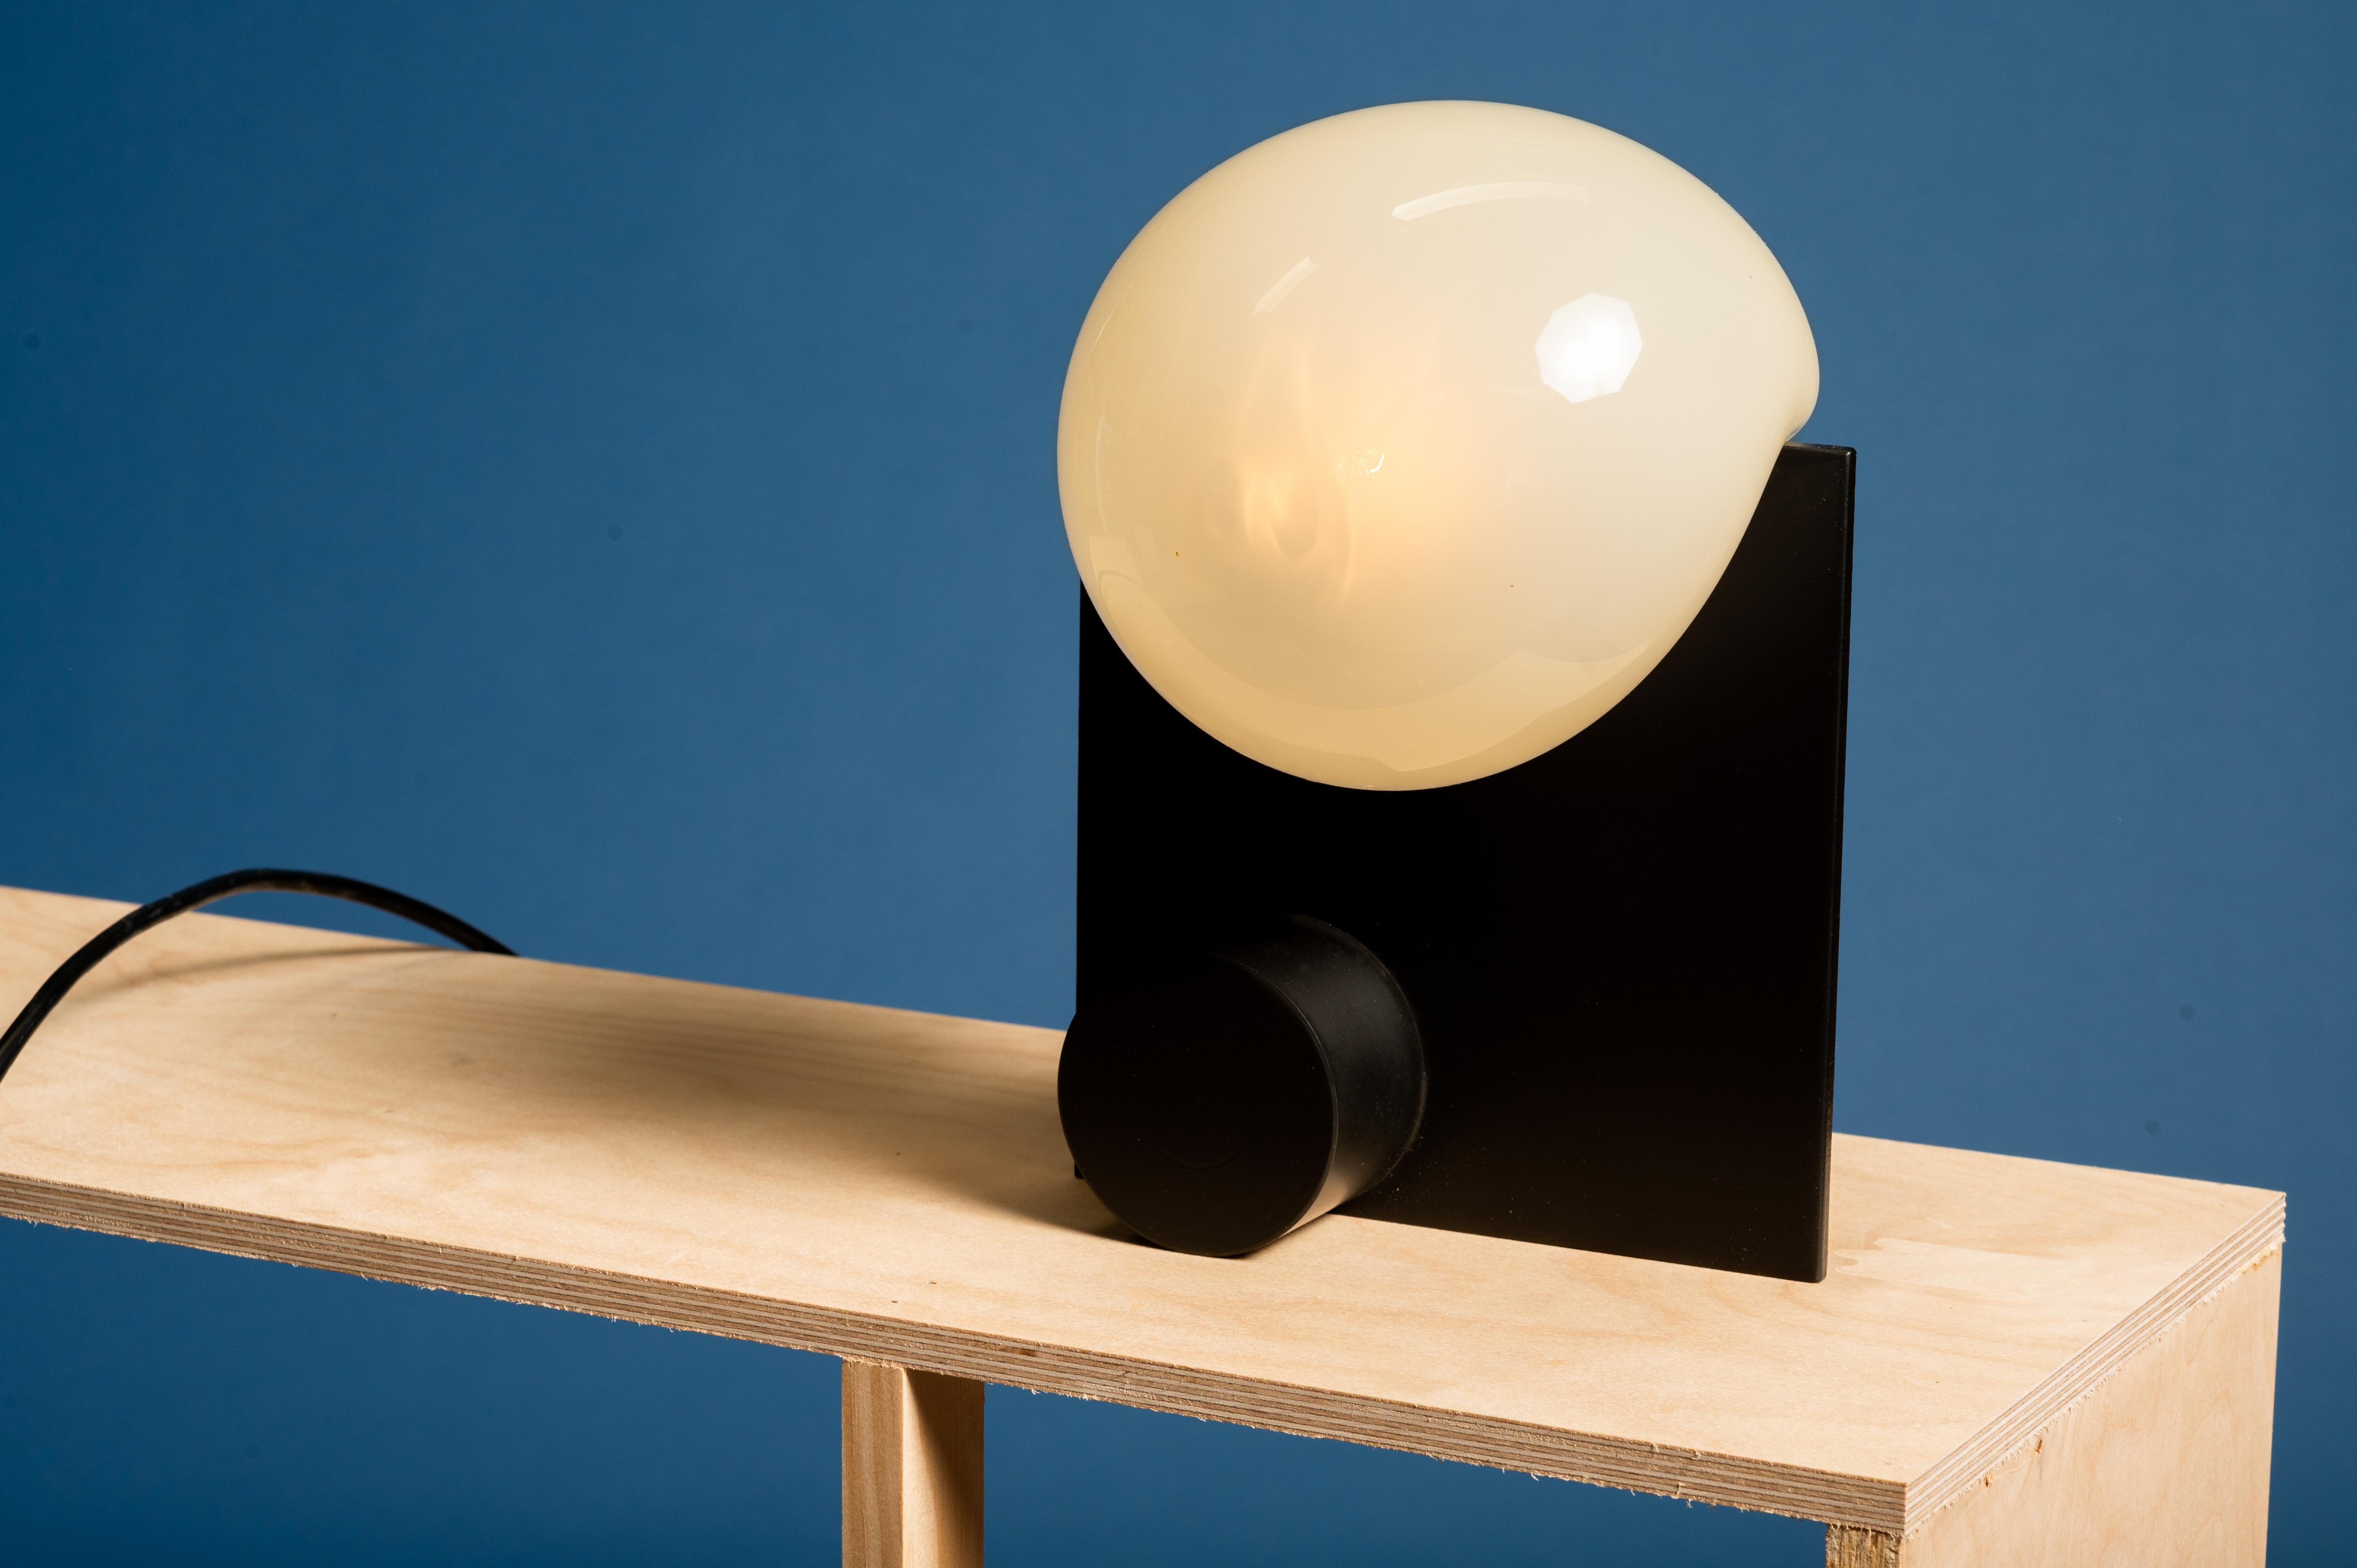 Black Bloop table lamp by Nick Pourfard
Dimensions: D 10 x W 20.5 x H 20.5 cm.
Materials: metal, glass.
Different finishes available. 

All our lamps can be wired according to each country. If sold to the USA it will be wired for the USA for